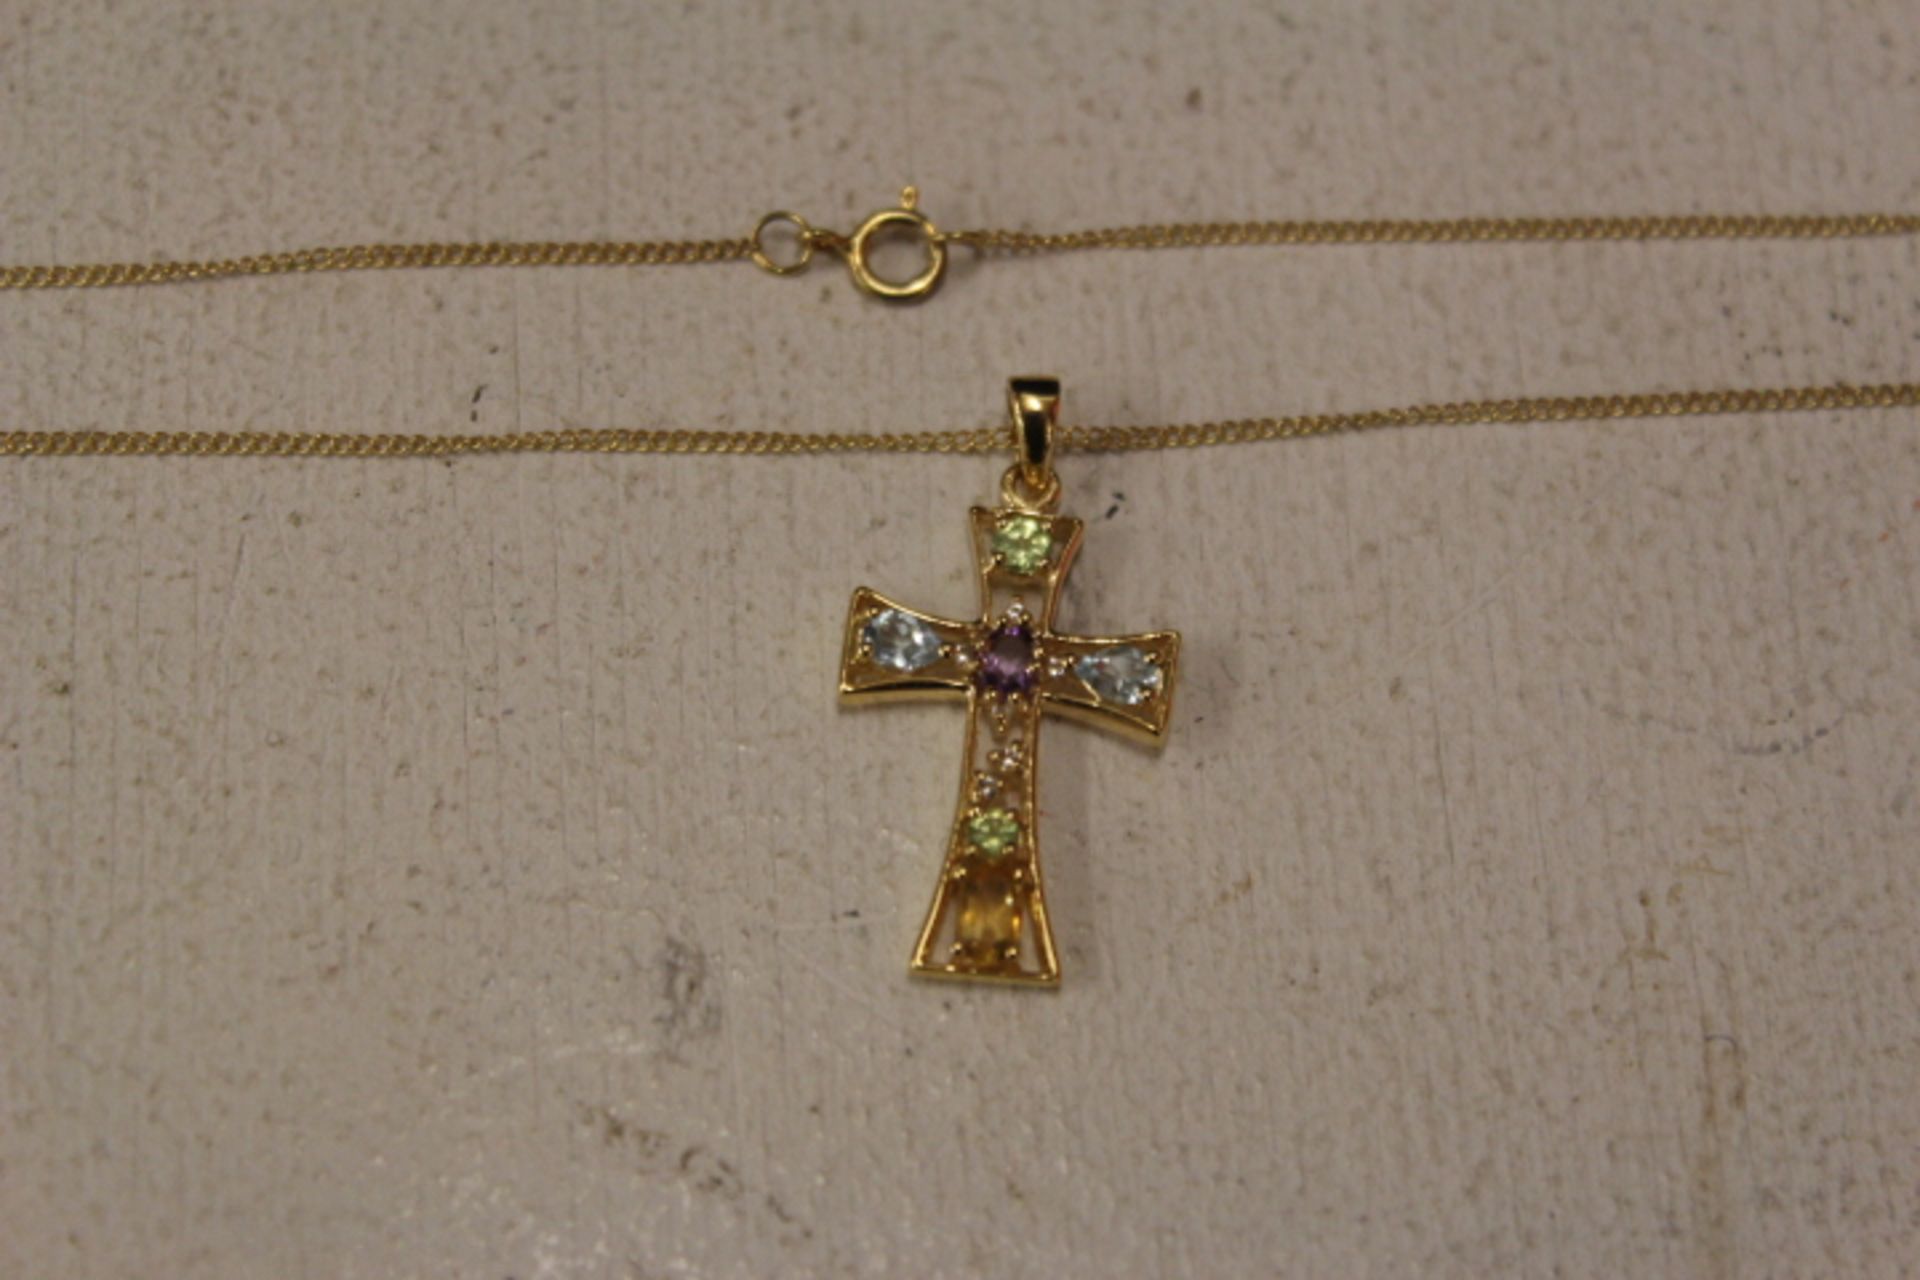 V *TRADE QTY* YM Chain With Multi Stone Cross X 3 YOUR BID PRICE TO BE MULTIPLIED BY THREE